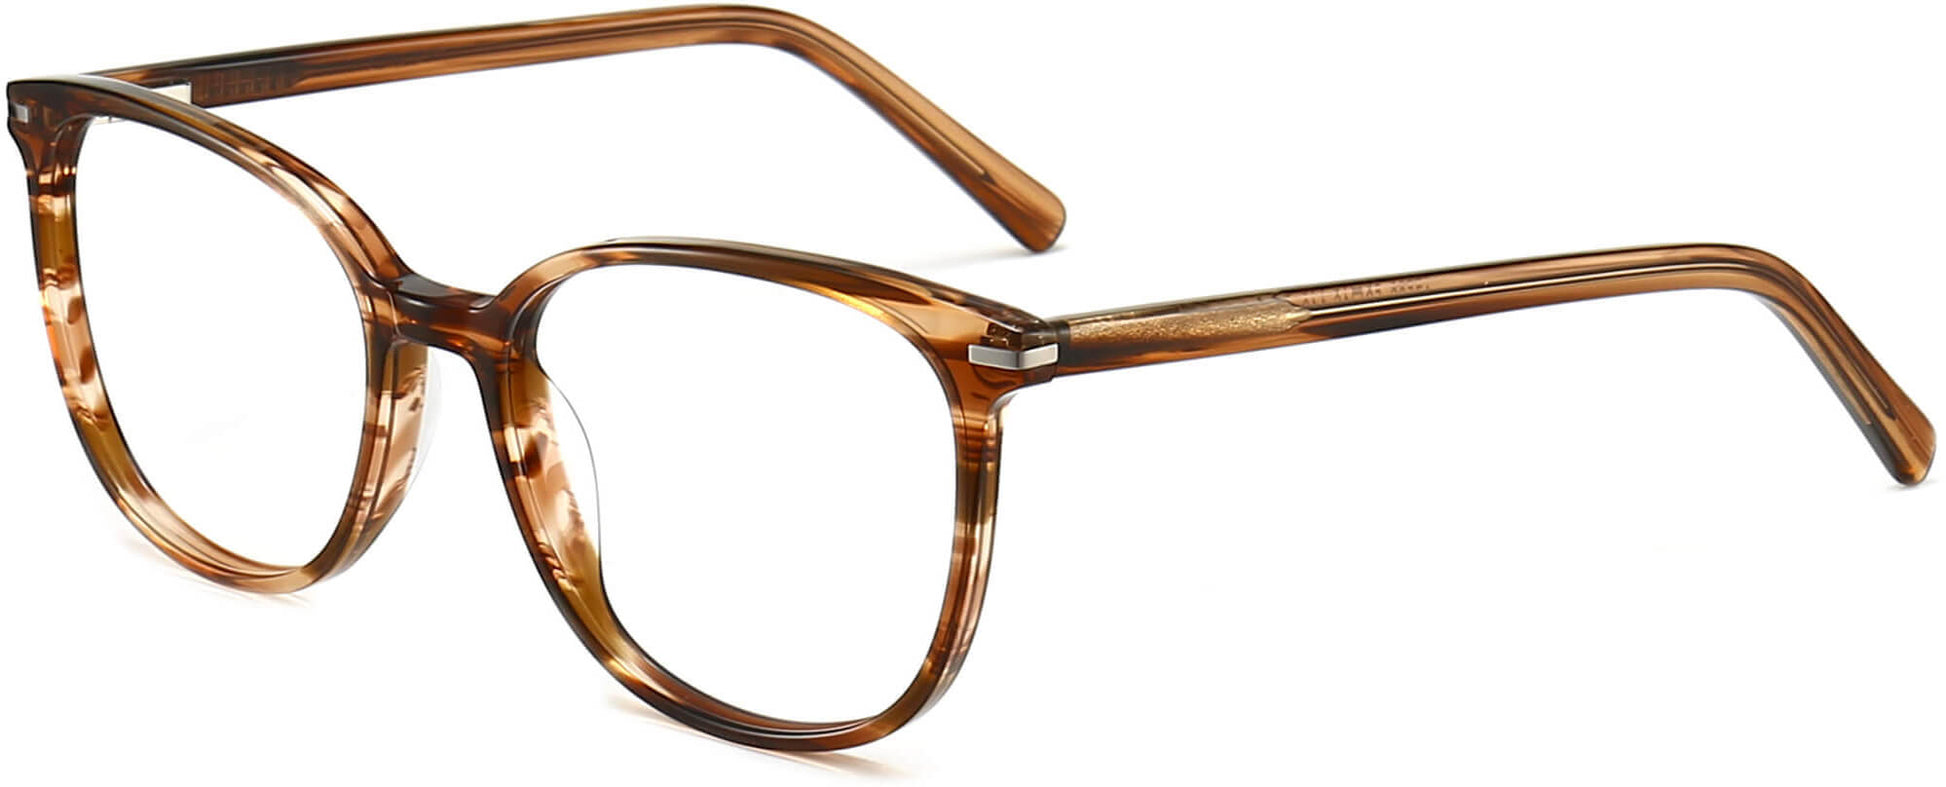 Knoxville Cateye Tortoise  Eyeglasses from ANRRI, angle view